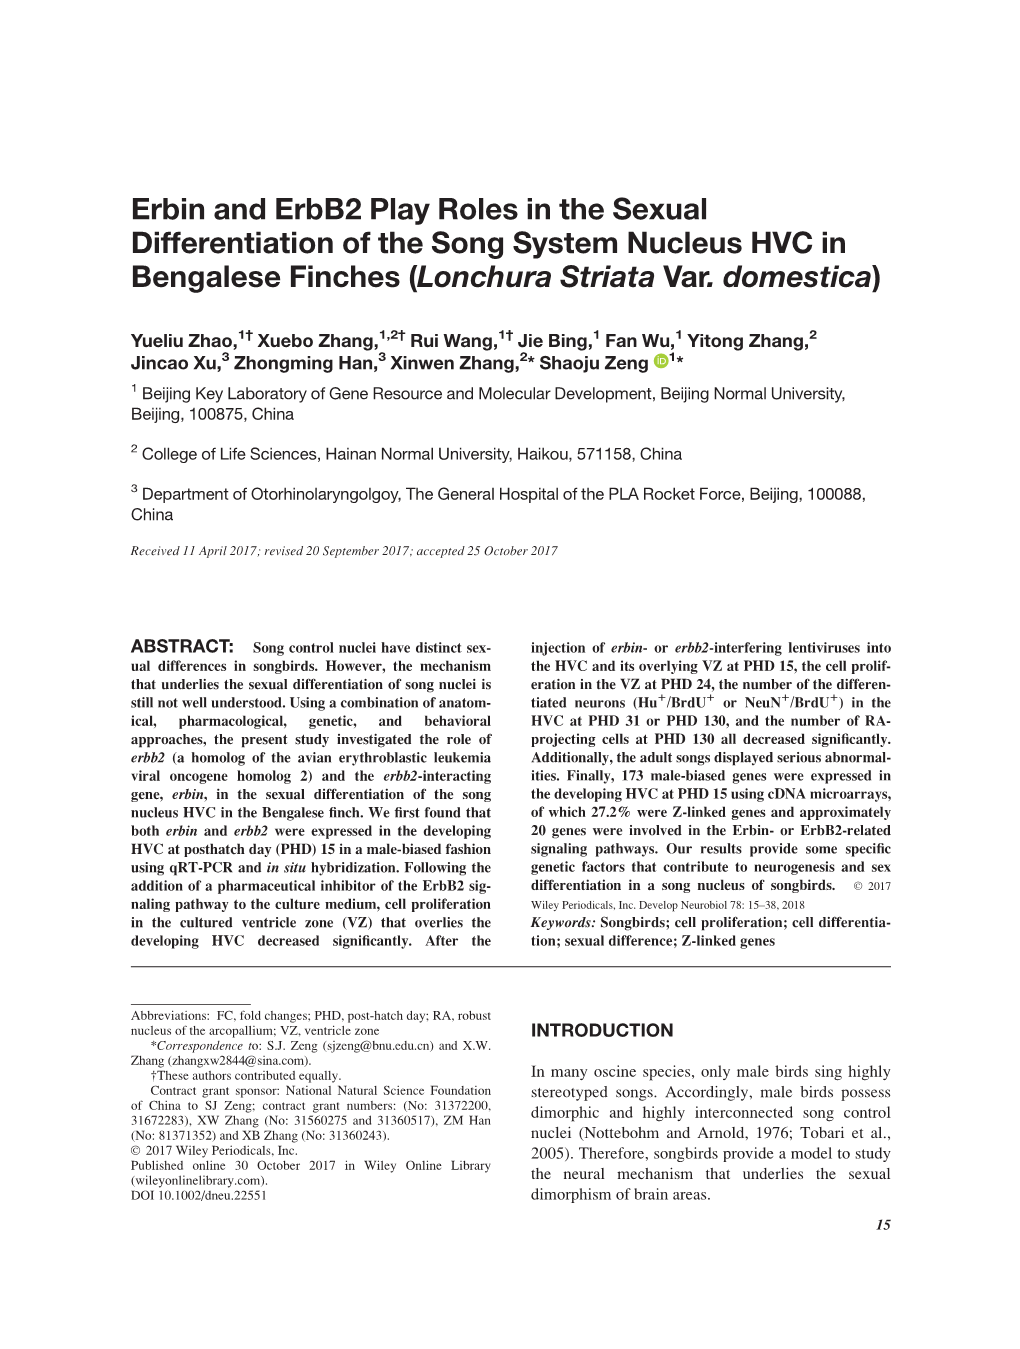 Erbin and Erbb2 Play Roles in the Sexual Differentiation of the Song System Nucleus HVC in Bengalese Finches (Lonchura Striata Var